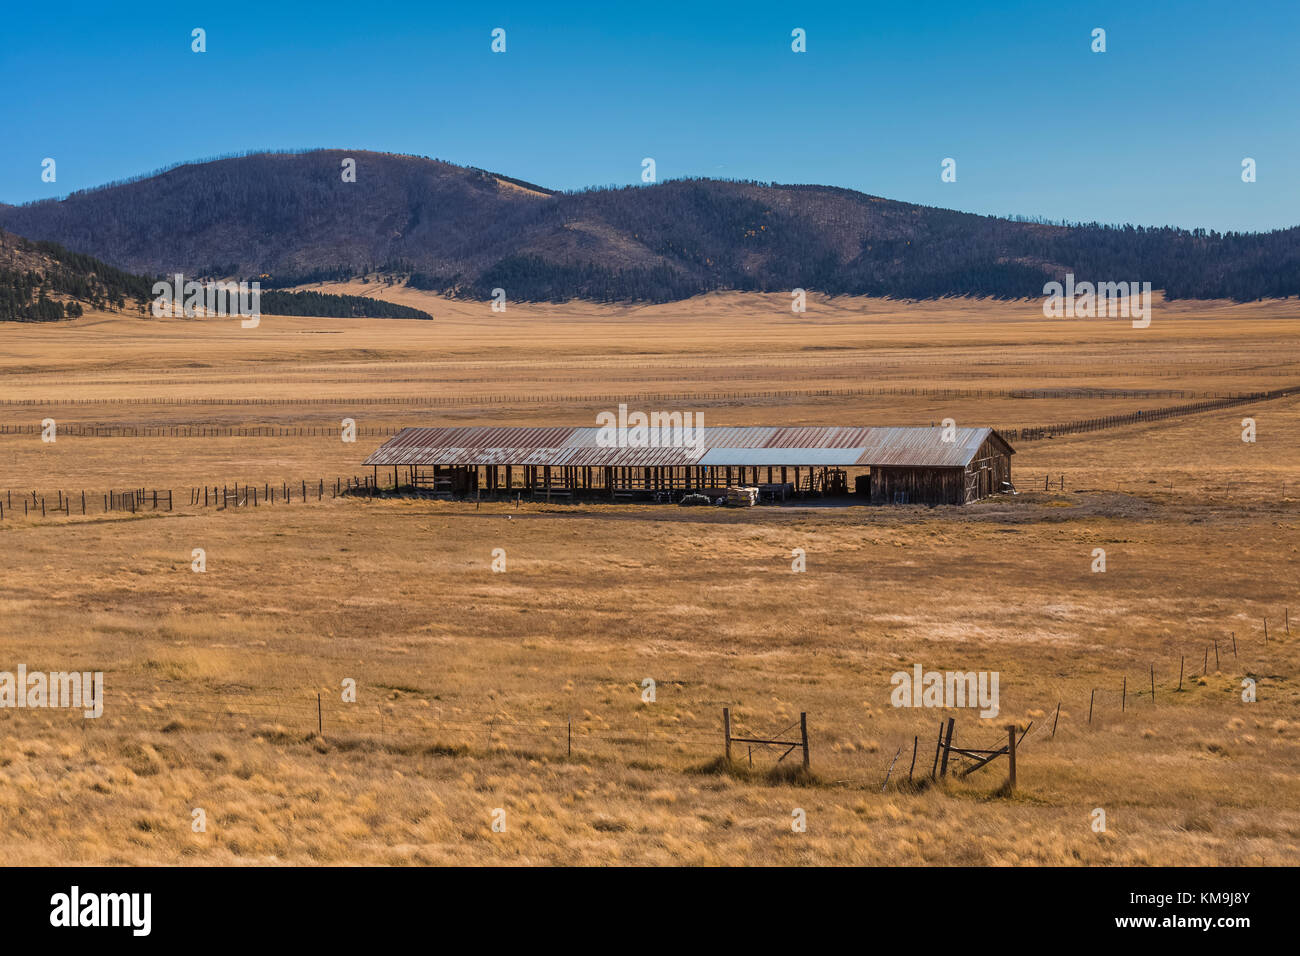 Barn nestled in the grasslands of Valles Caldera National Preserve, a preserve run by the National Park Service, New Mexico, USA Stock Photo